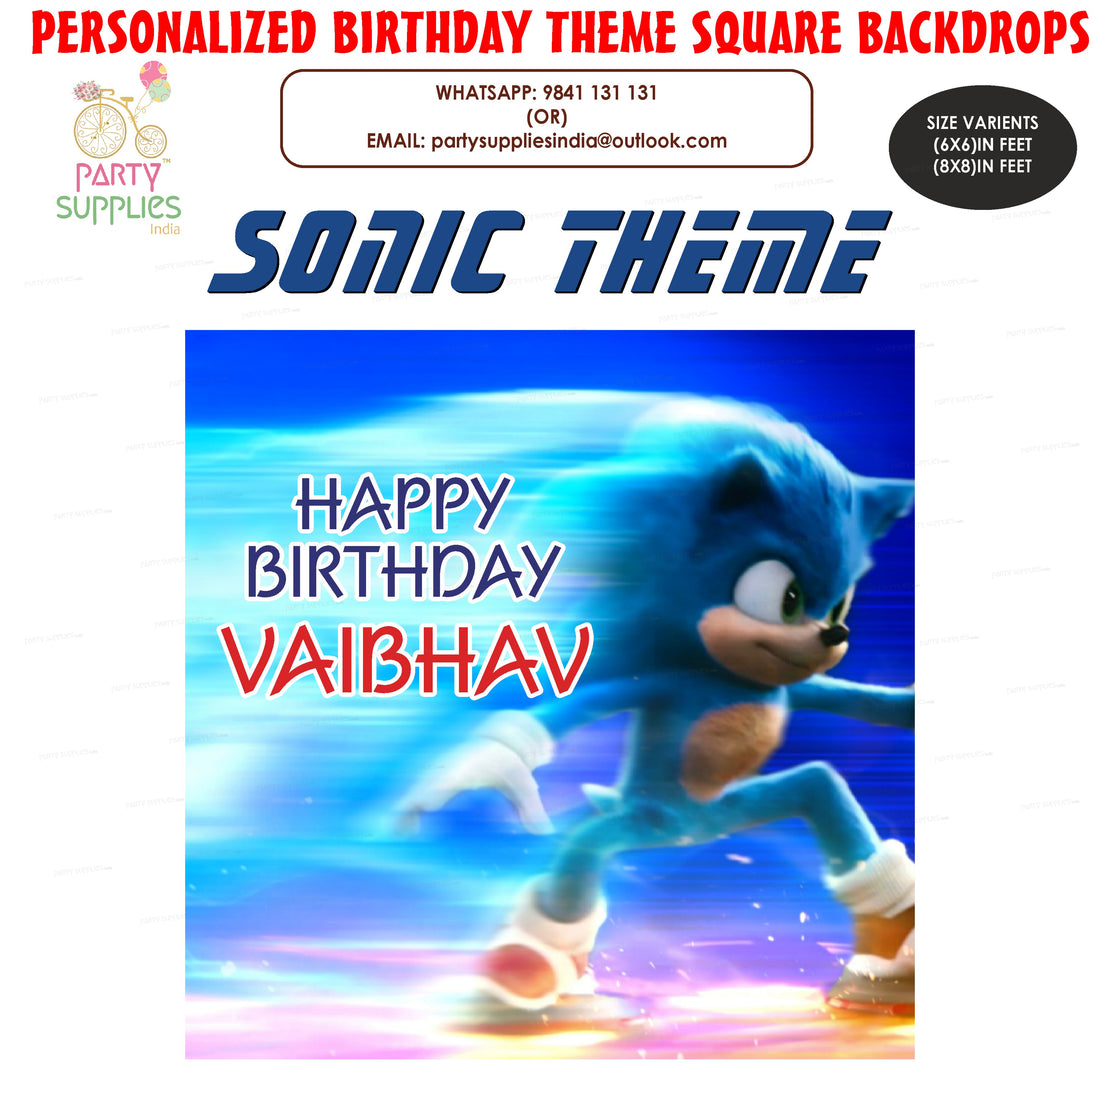 PSI Sonic the Hedgehog Theme Customized Square Backdrop